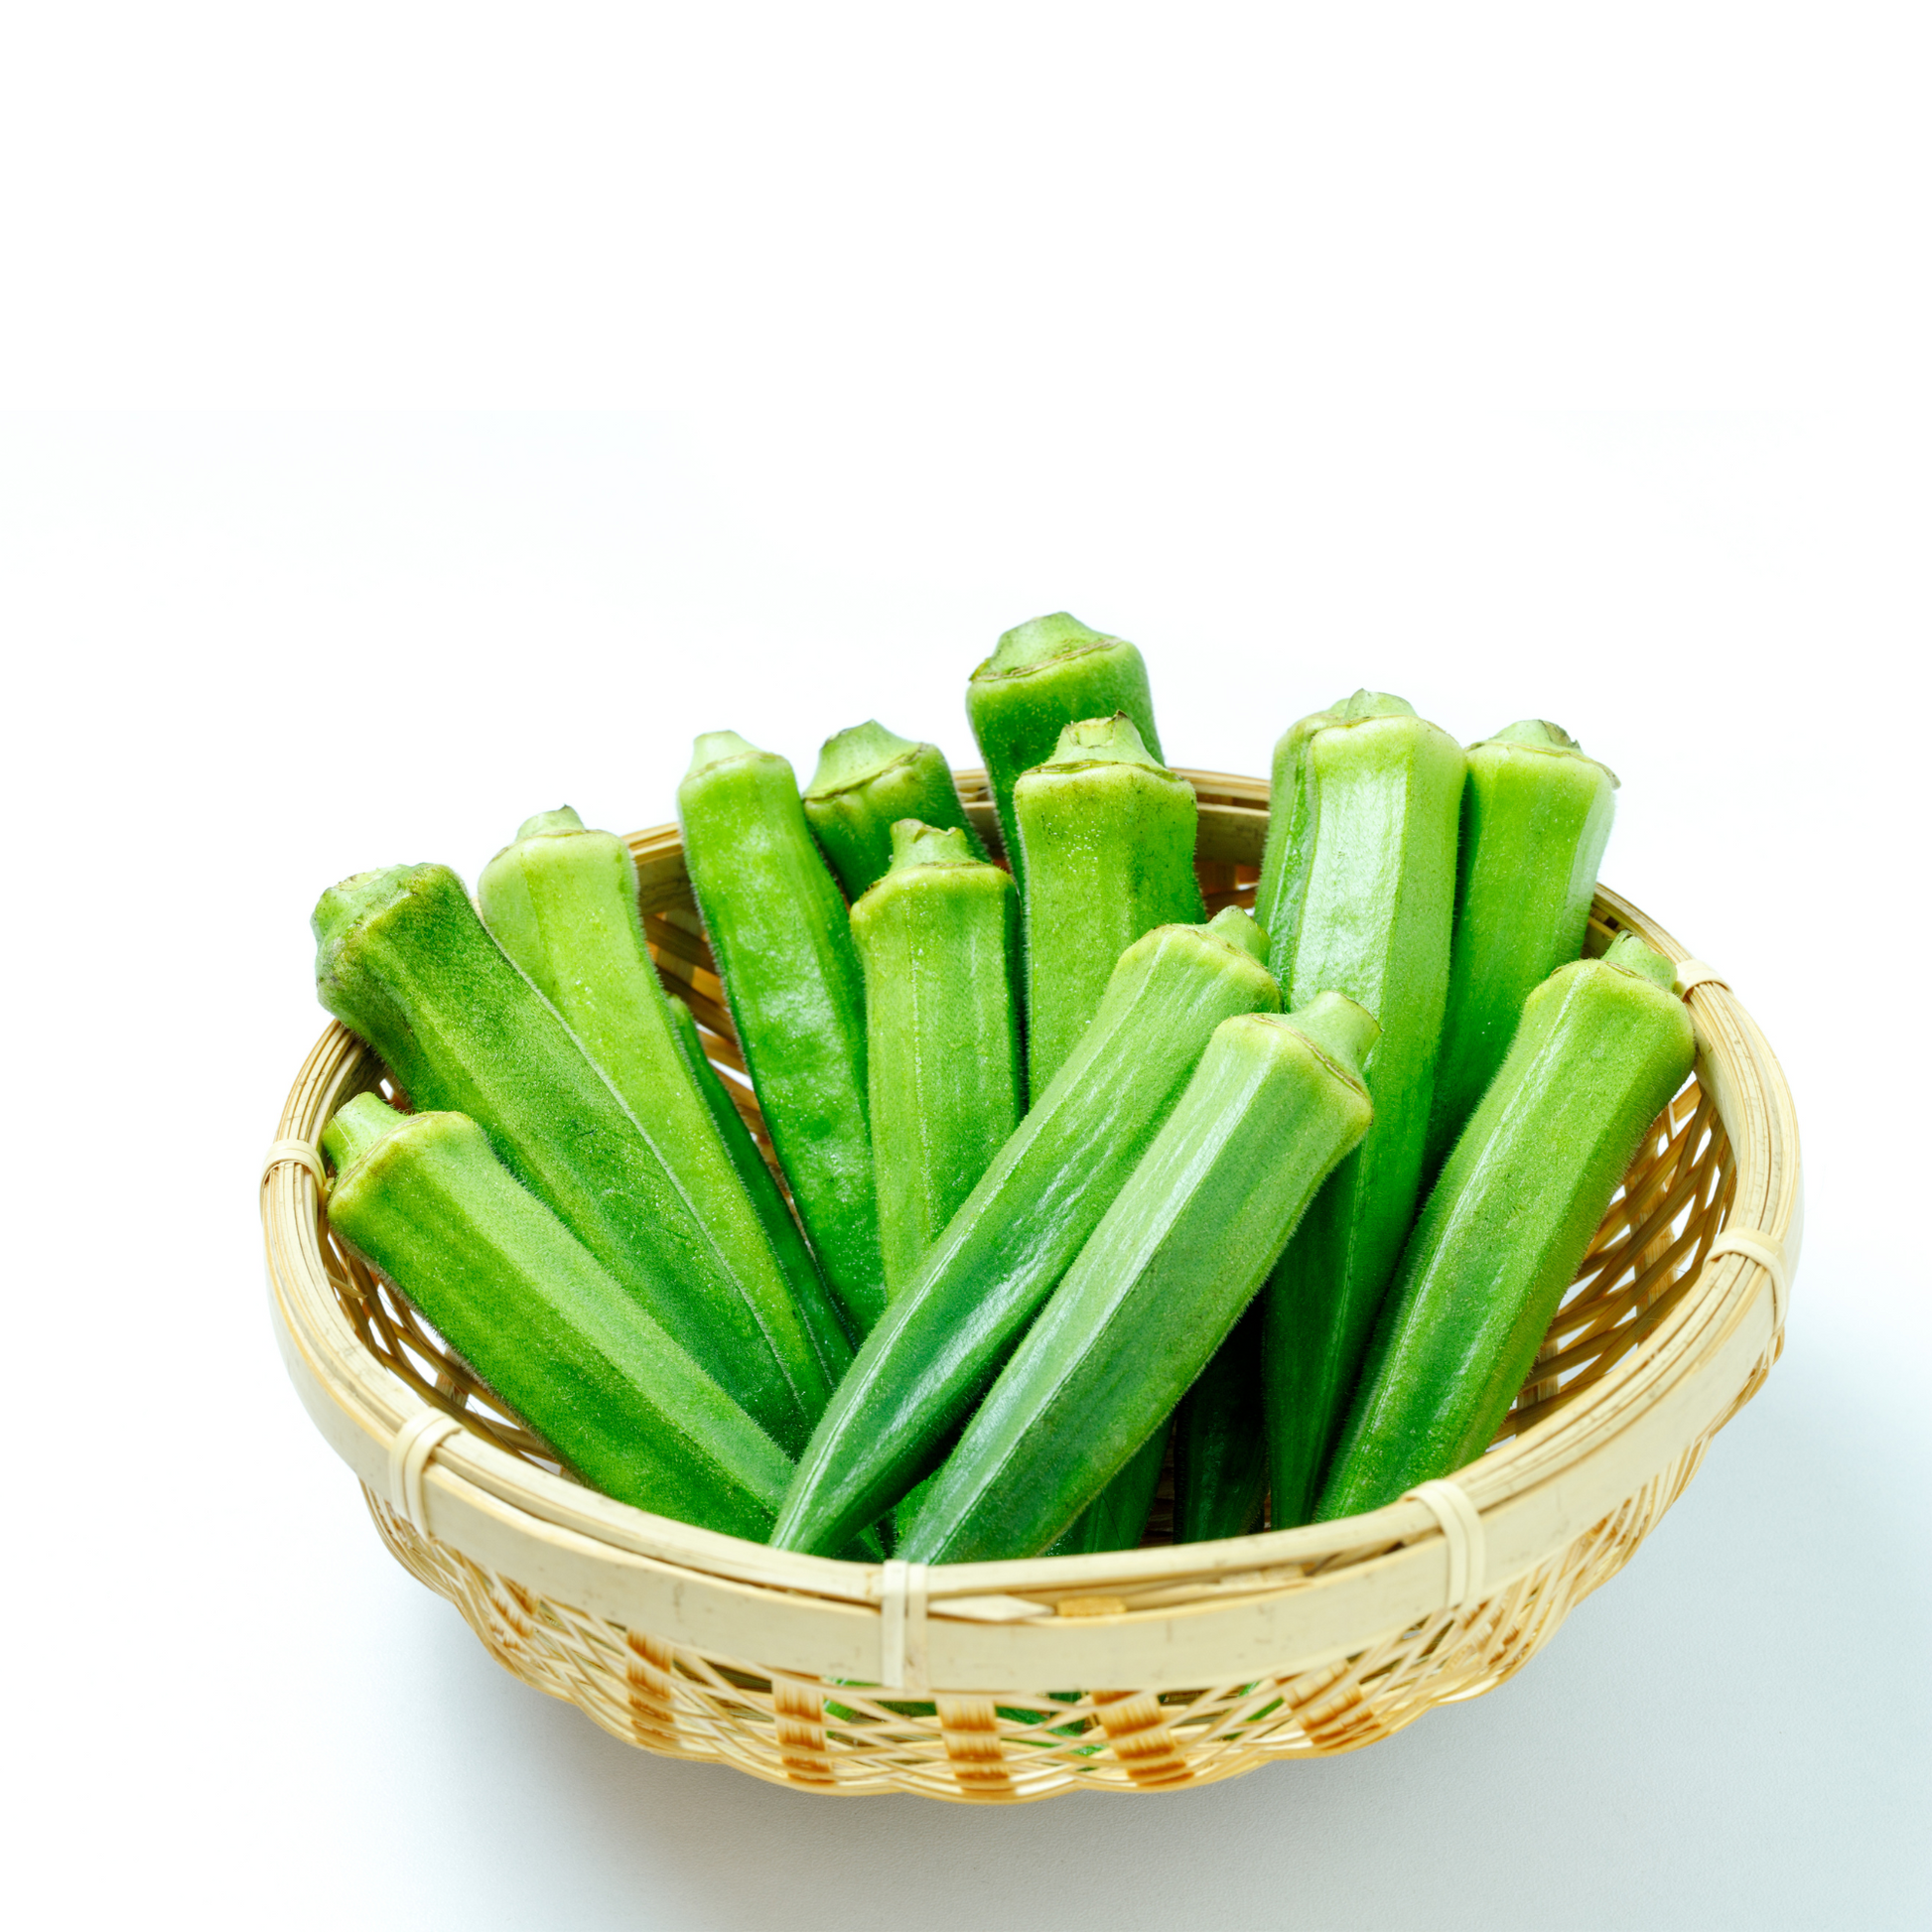 Basket filled with fully-grown Clemson Spineless Okra pods on a white background